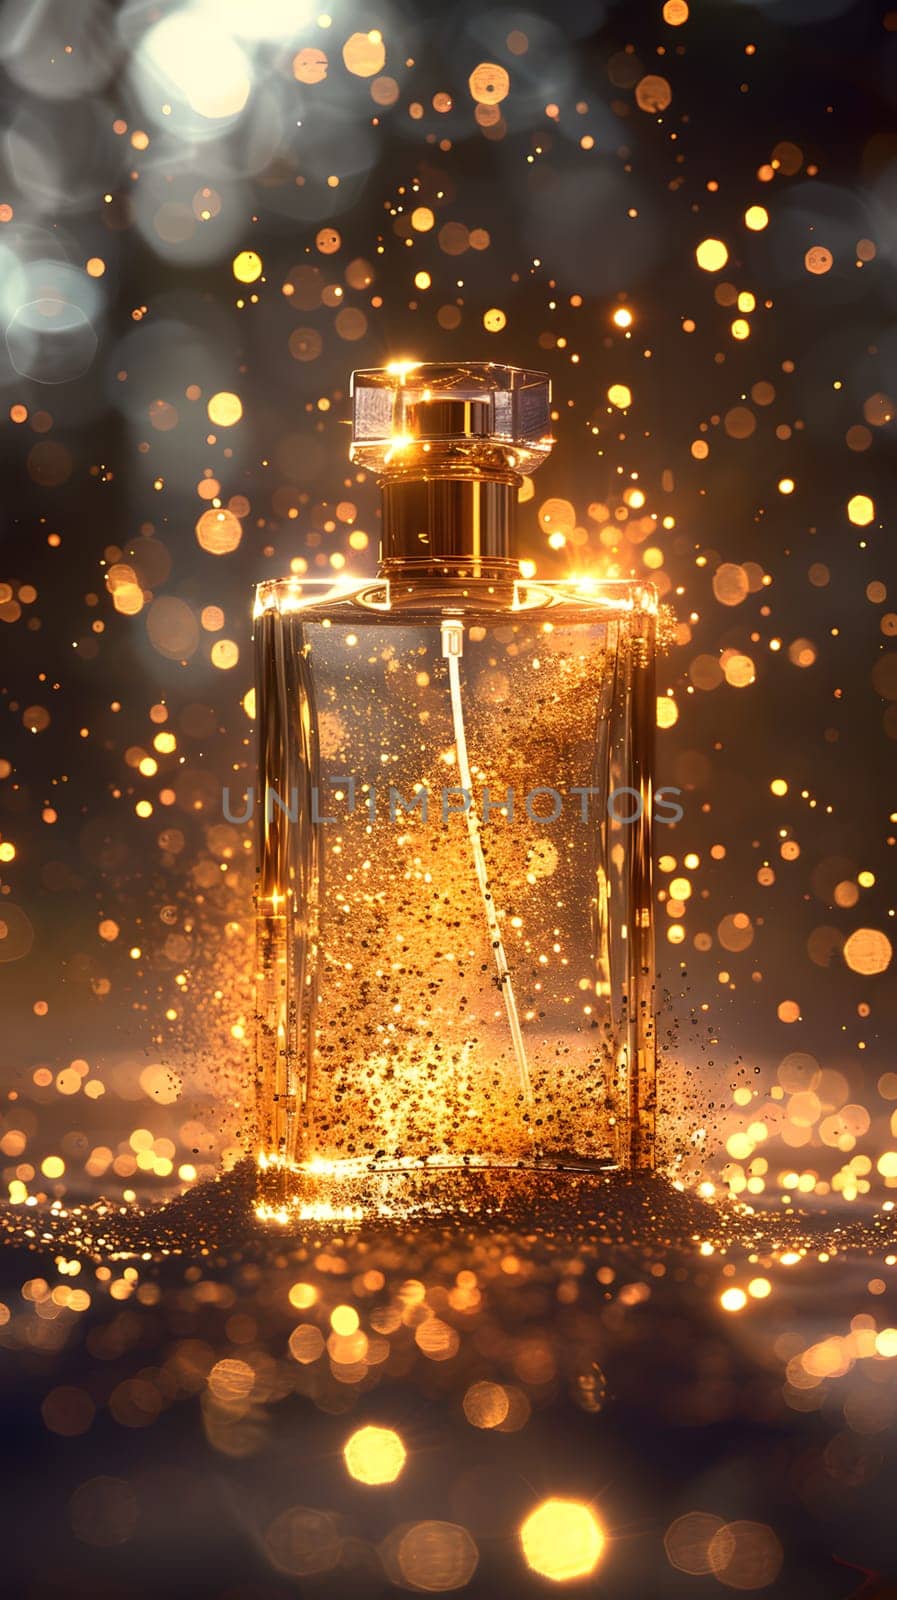 Atmospheric phenomenon surrounds the perfume bottle with gold glitter by Nadtochiy